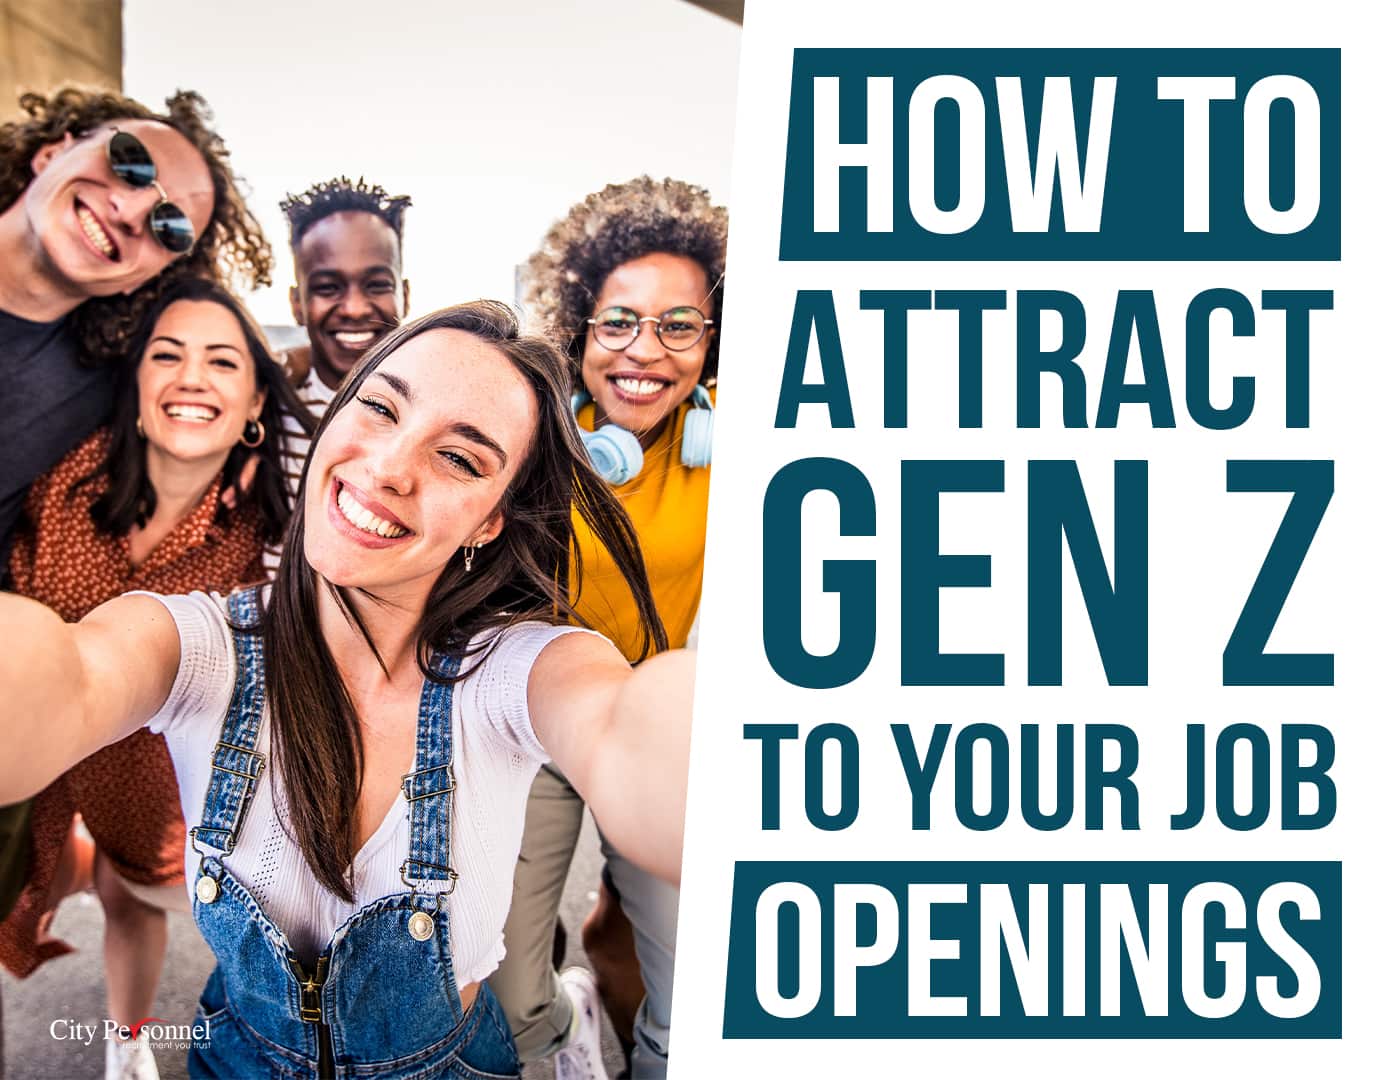 How to Attract Gen Z to Your Job Openings